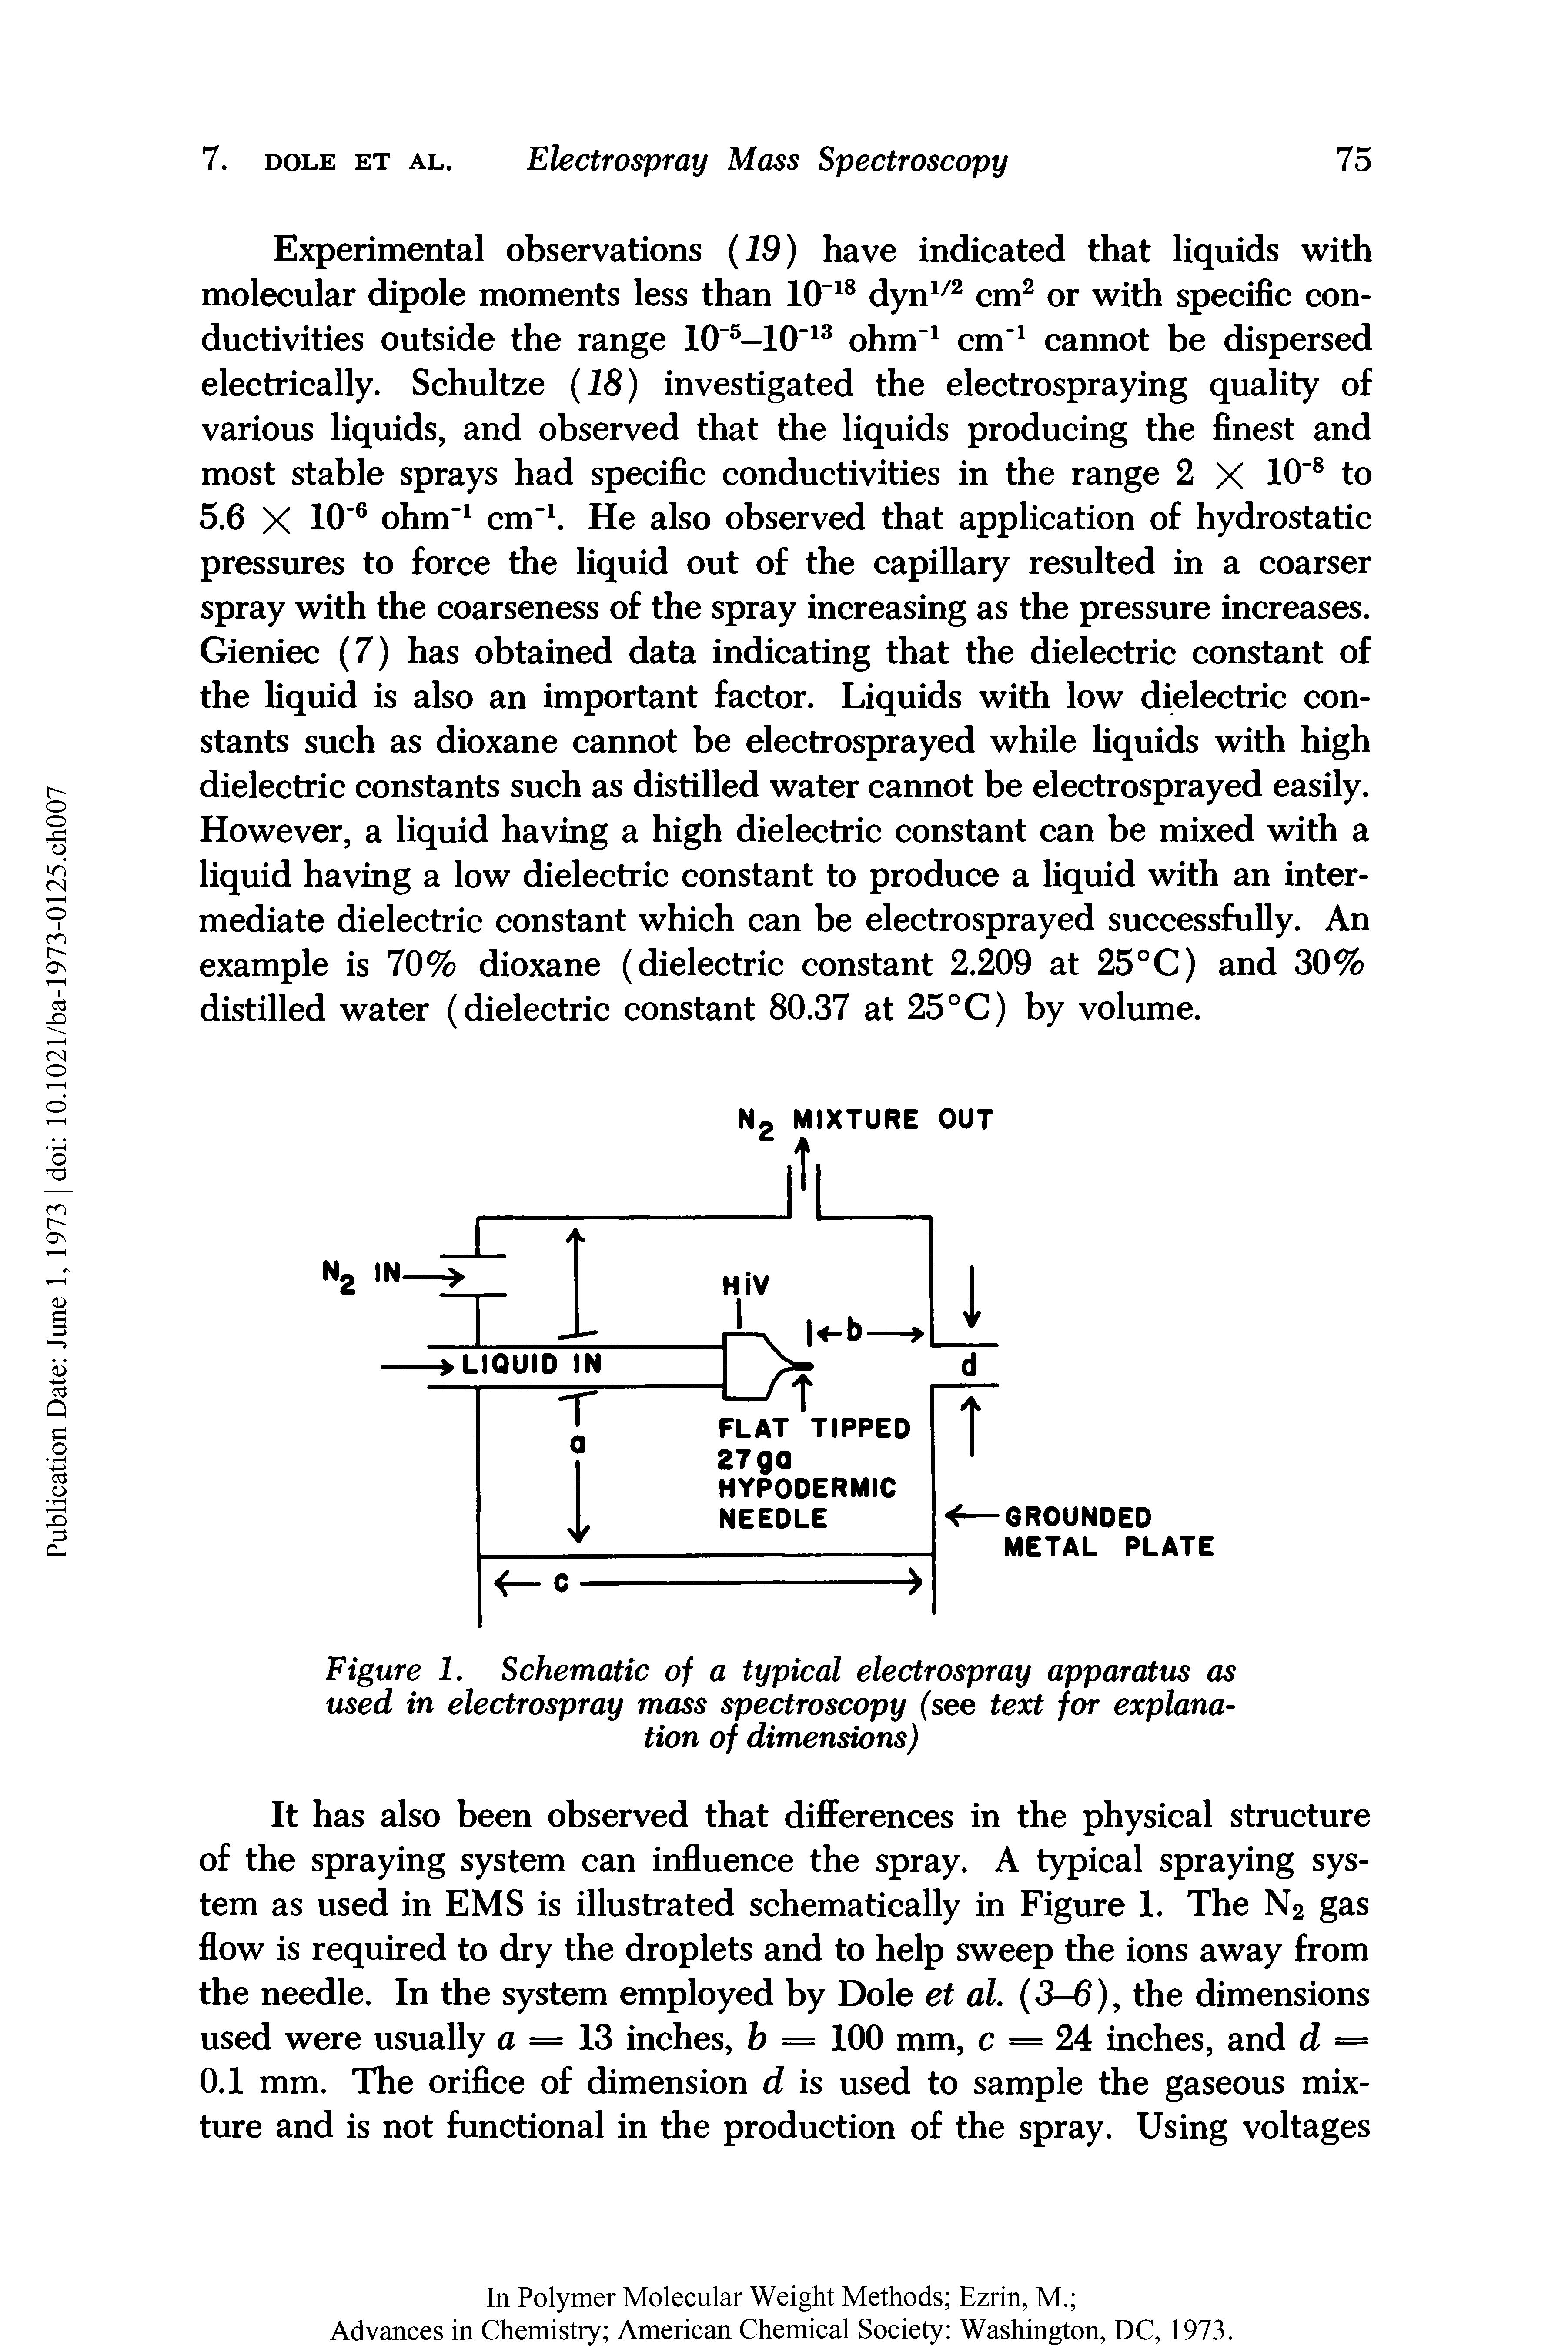 Figure 1. Schematic of a typical electrospray apparatus as used in electrospray mass spectroscopy (see text for explanation of dimensions)...